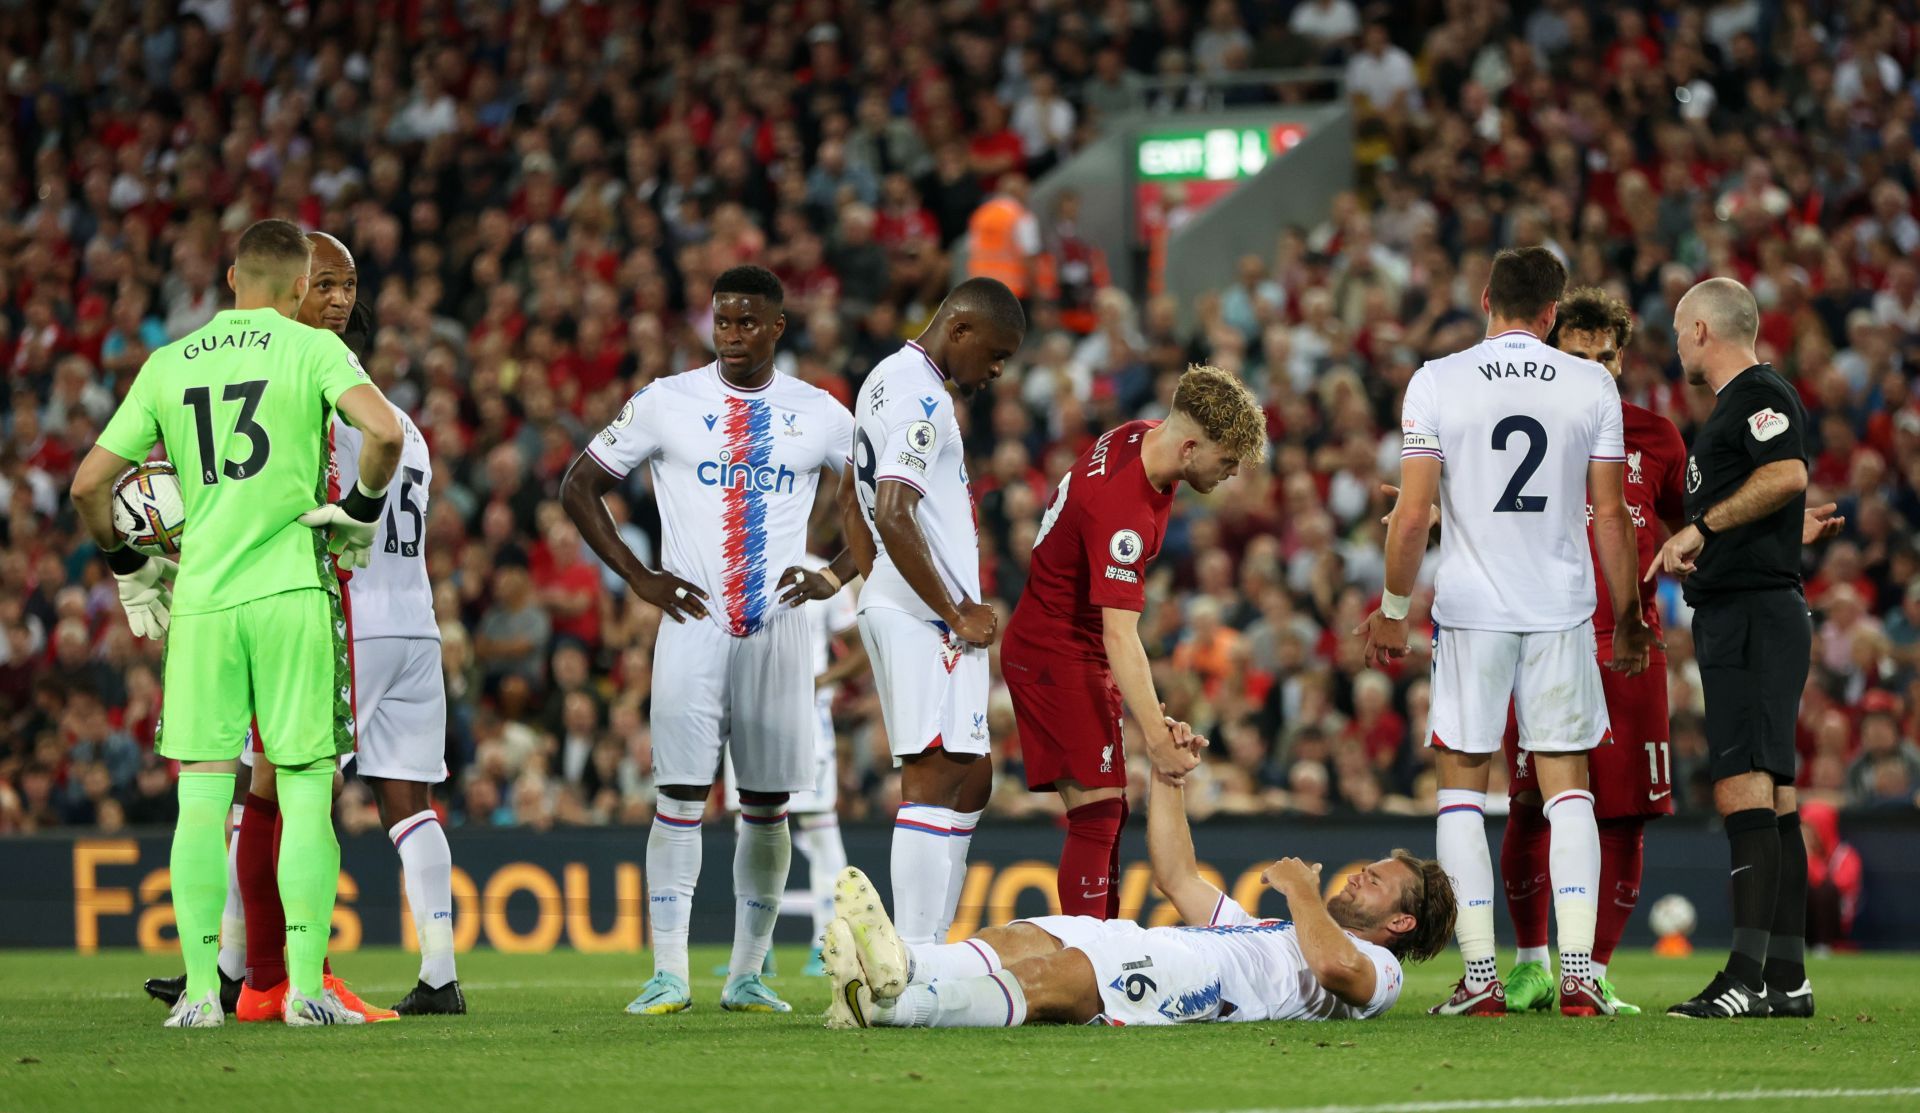 Anderson was floored by the Reds striker